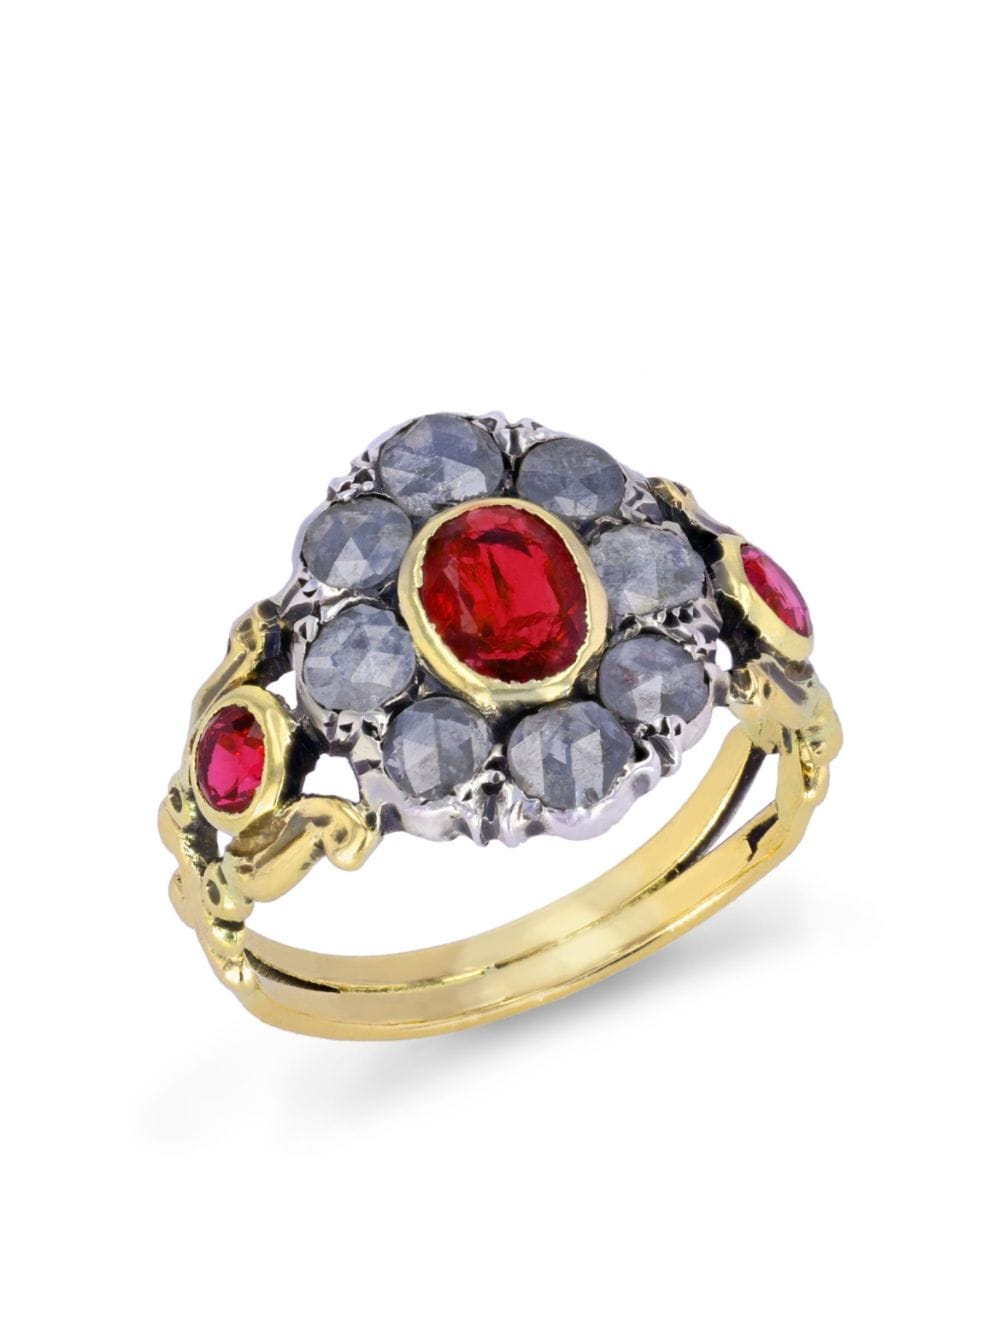 Pre-owned Pragnell Vintage 1790s 18kt Yellow Gold Georgian Ruby And Diamond Ring